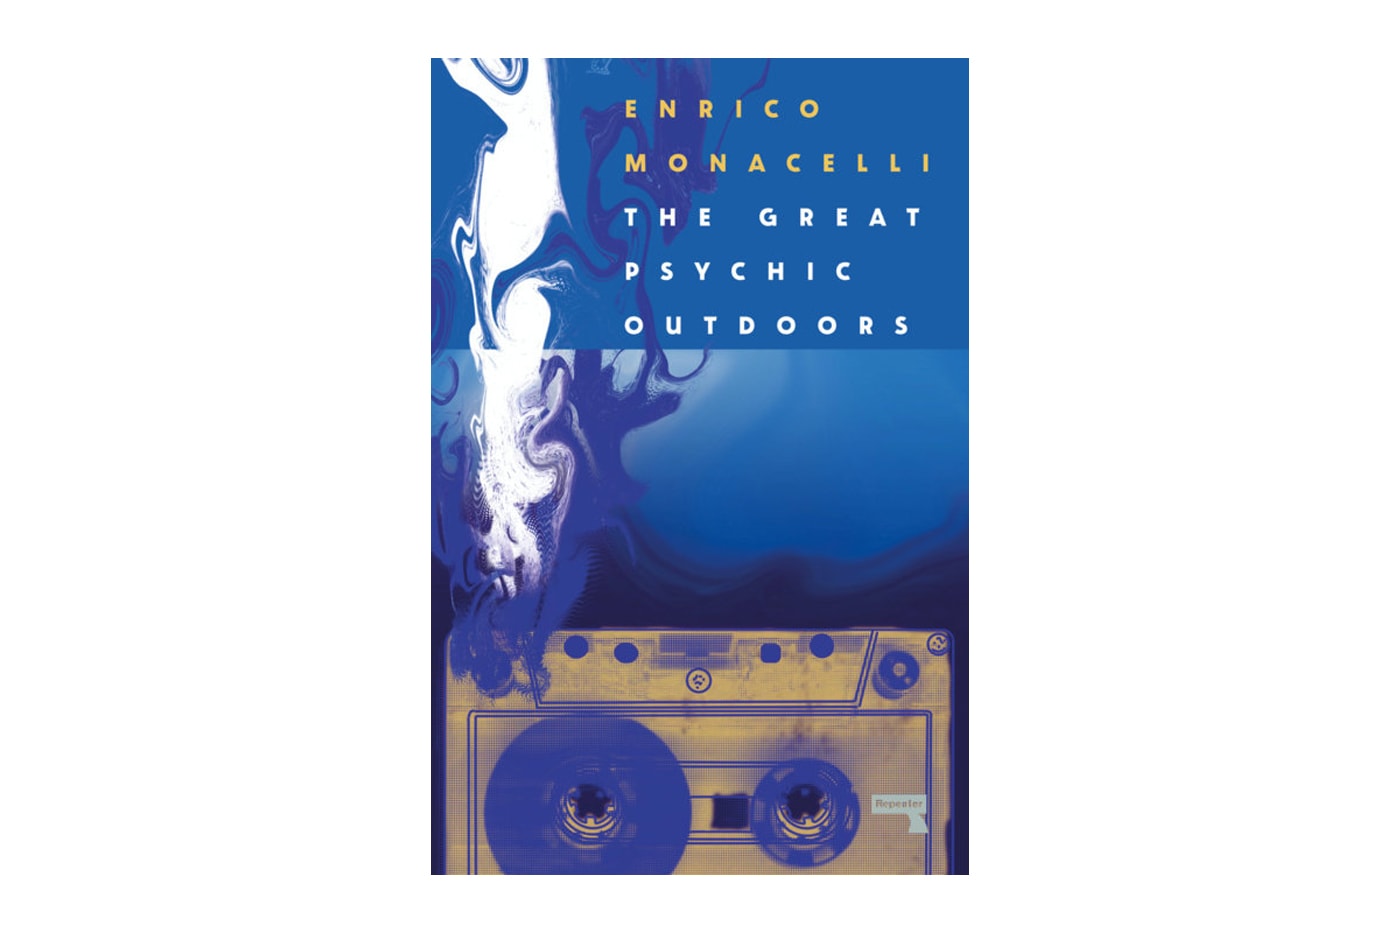 Enrico Monacelli The Great Psychic Outdoors Lo-Fi Music and Escaping Capitalism book Release Info